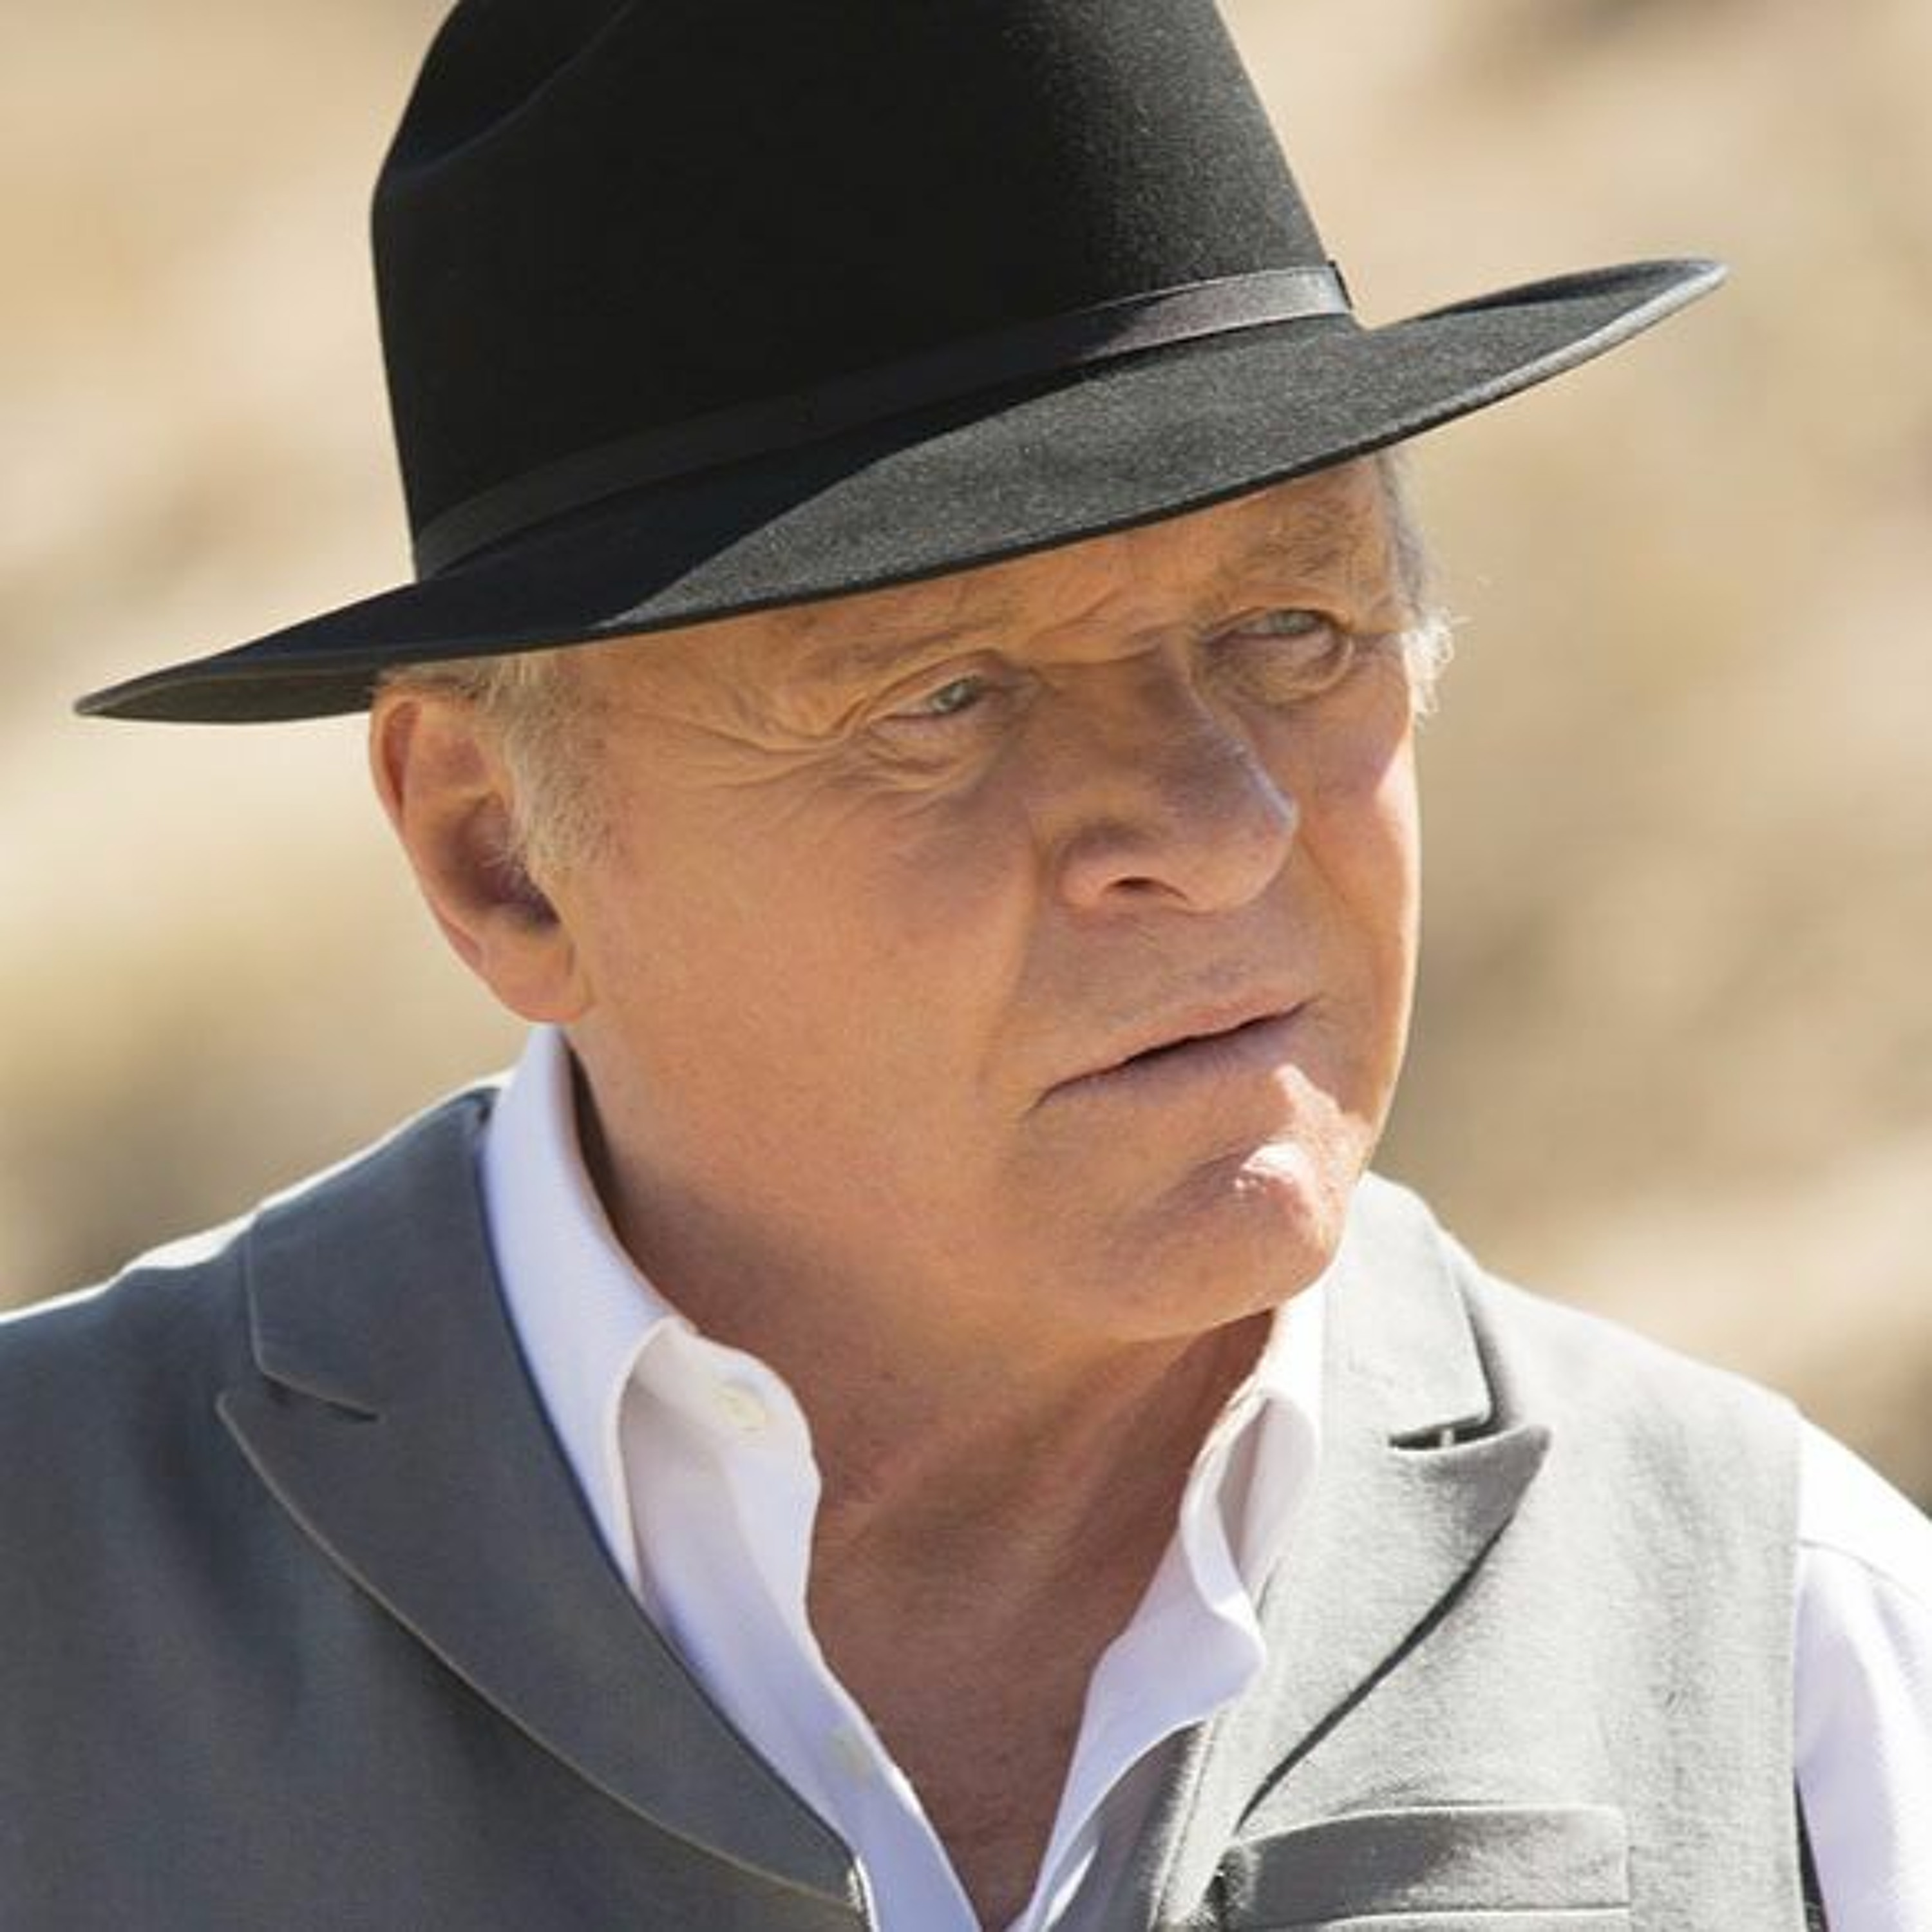 Westworld 102 "Chestnut" Recap and Review